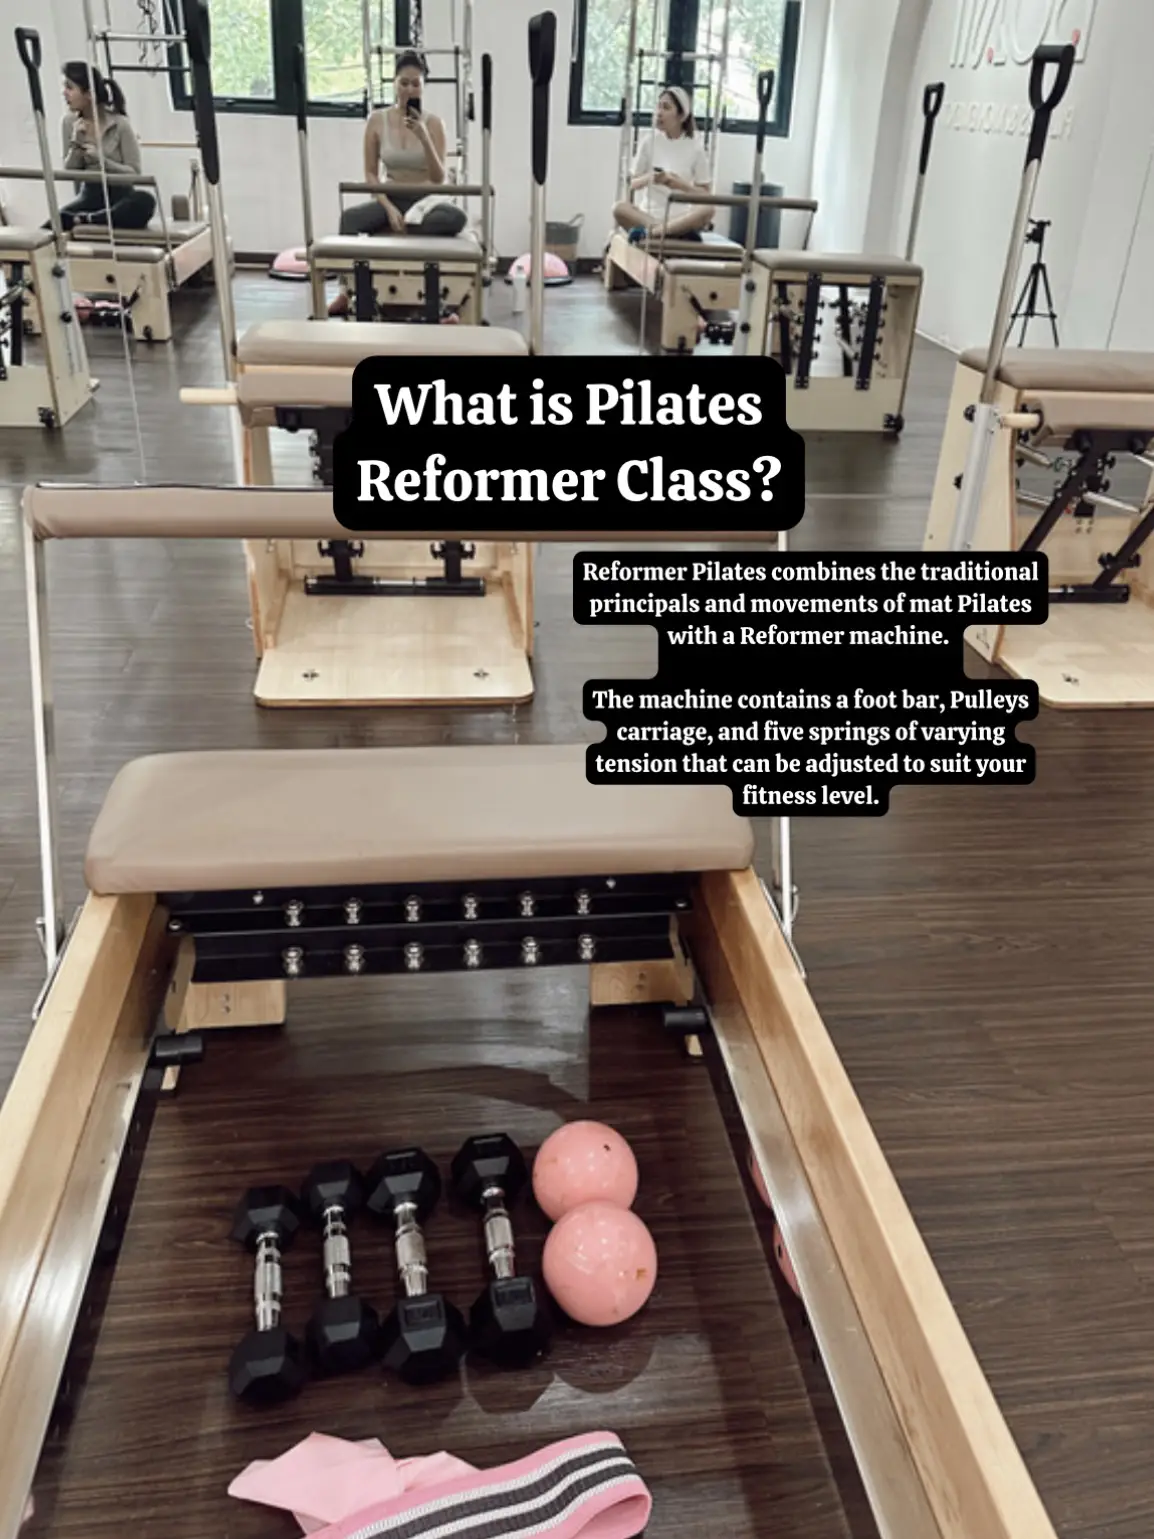 What To Wear For Reformer Pilates Classes, £5 Trial Class